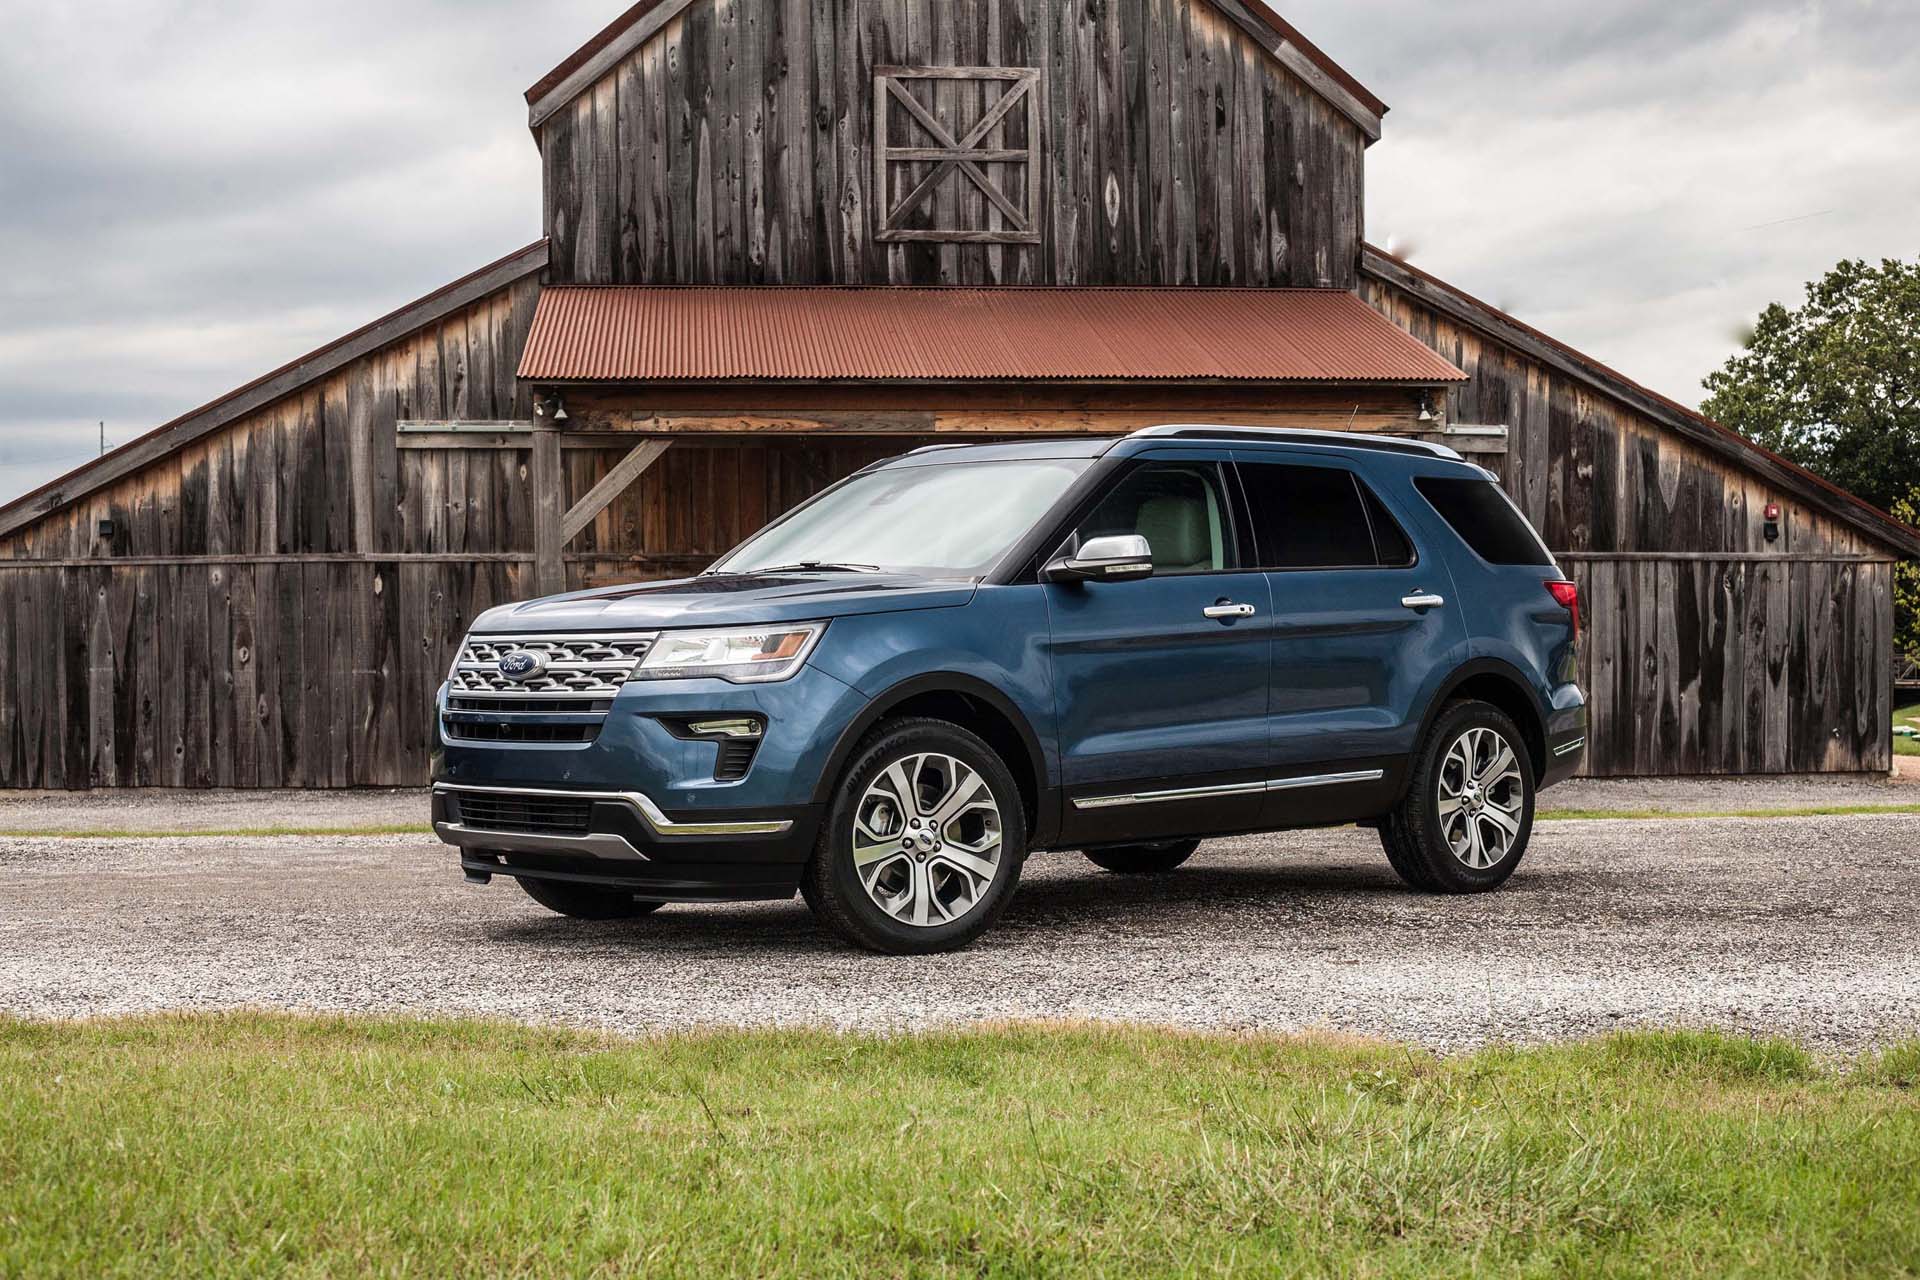 Ford recalls nearly 1.9M Explorers for loose parts